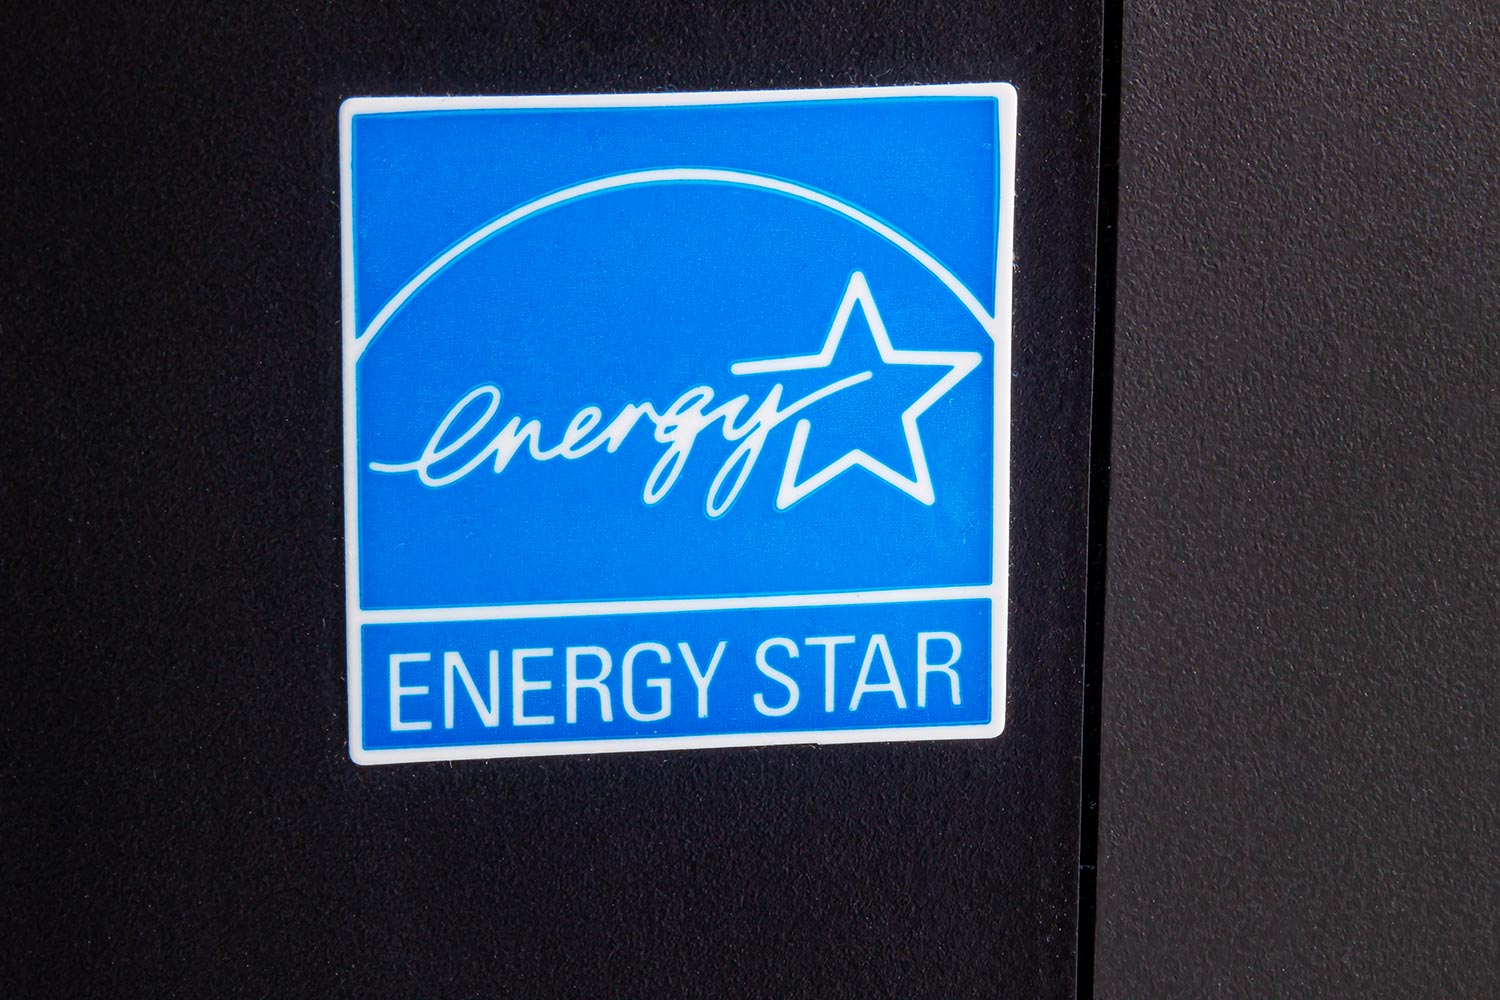 Energy Star stamp on an electronic is awarded to certified energy-efficient products